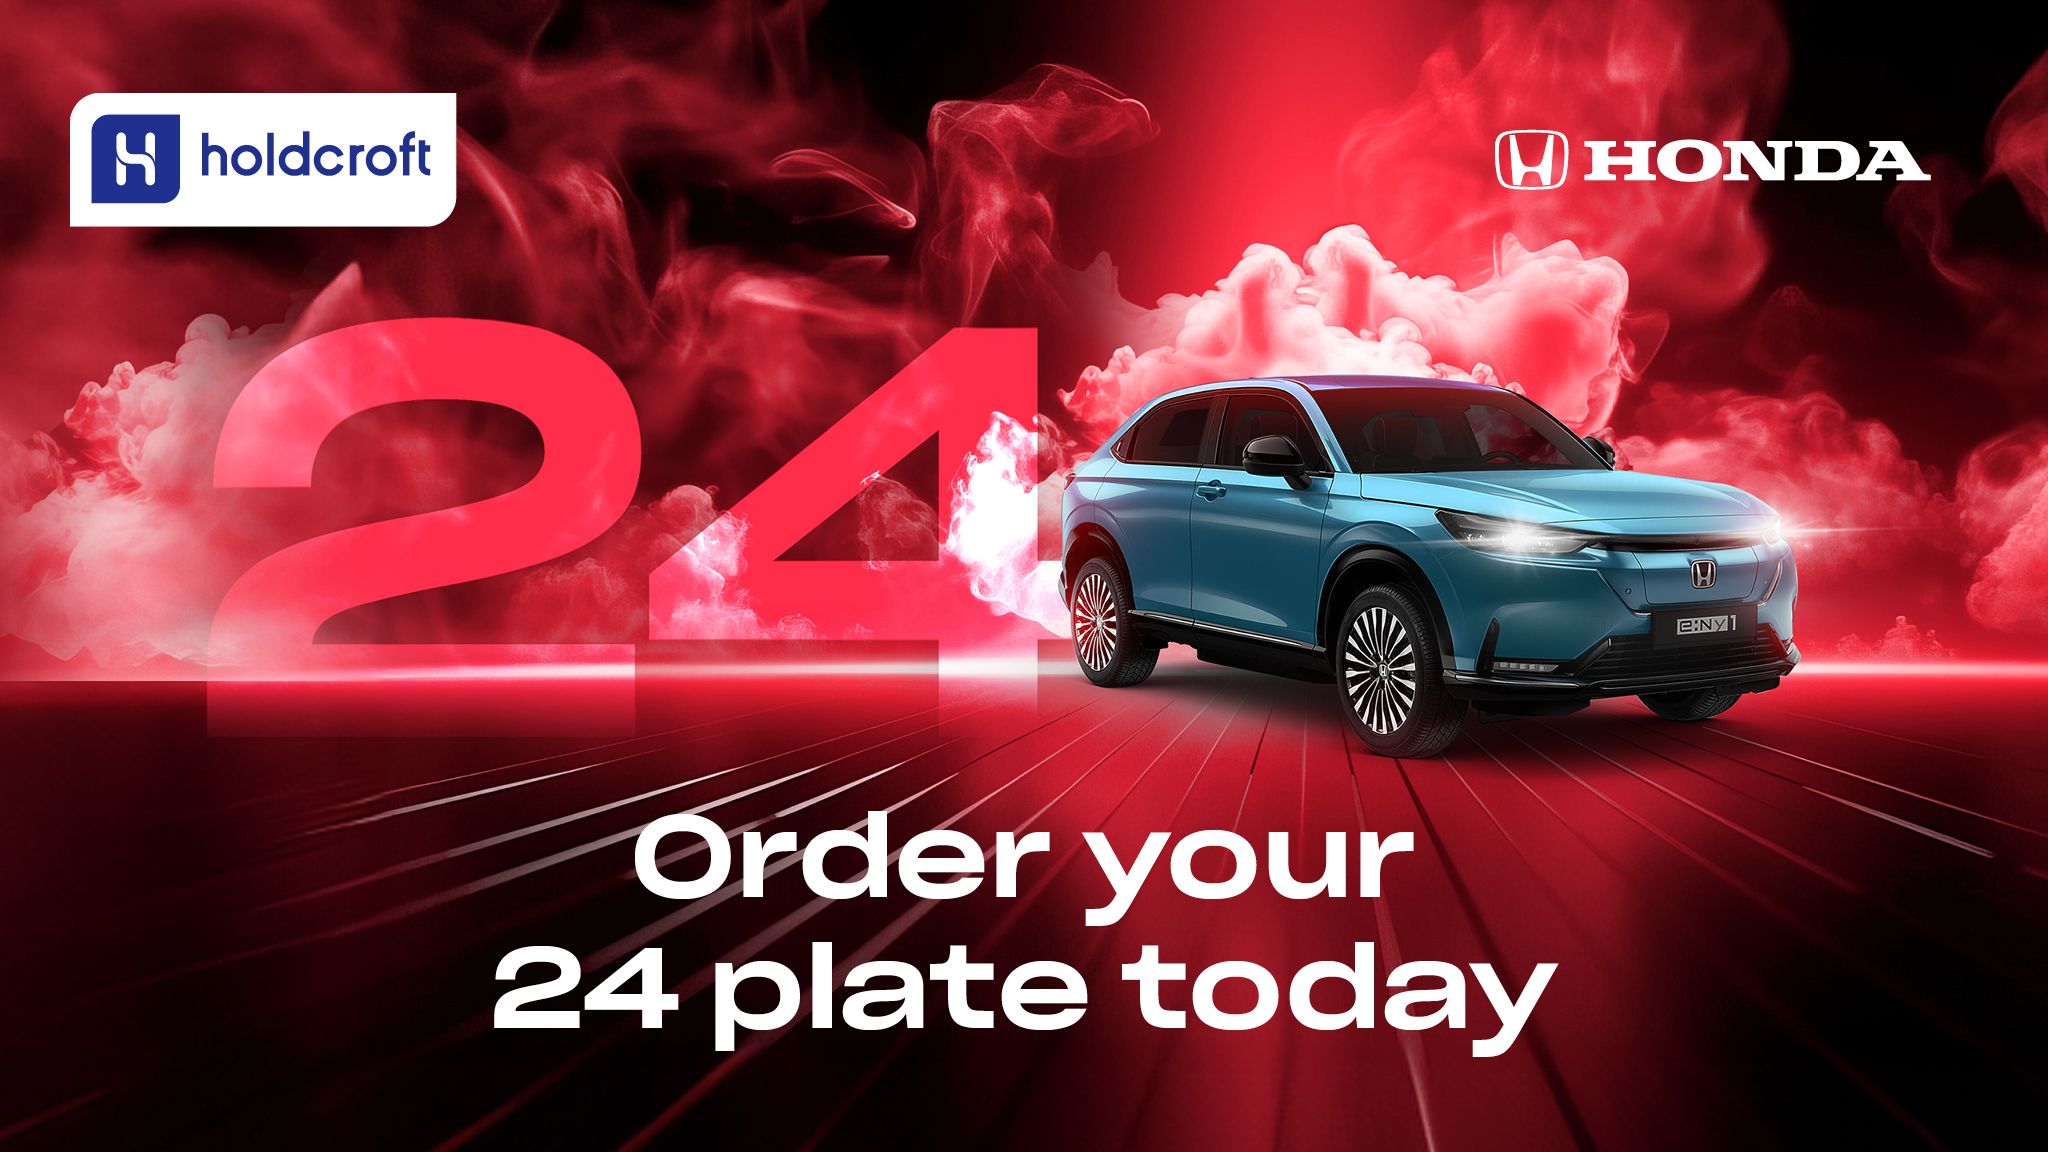 Order your 24 plate